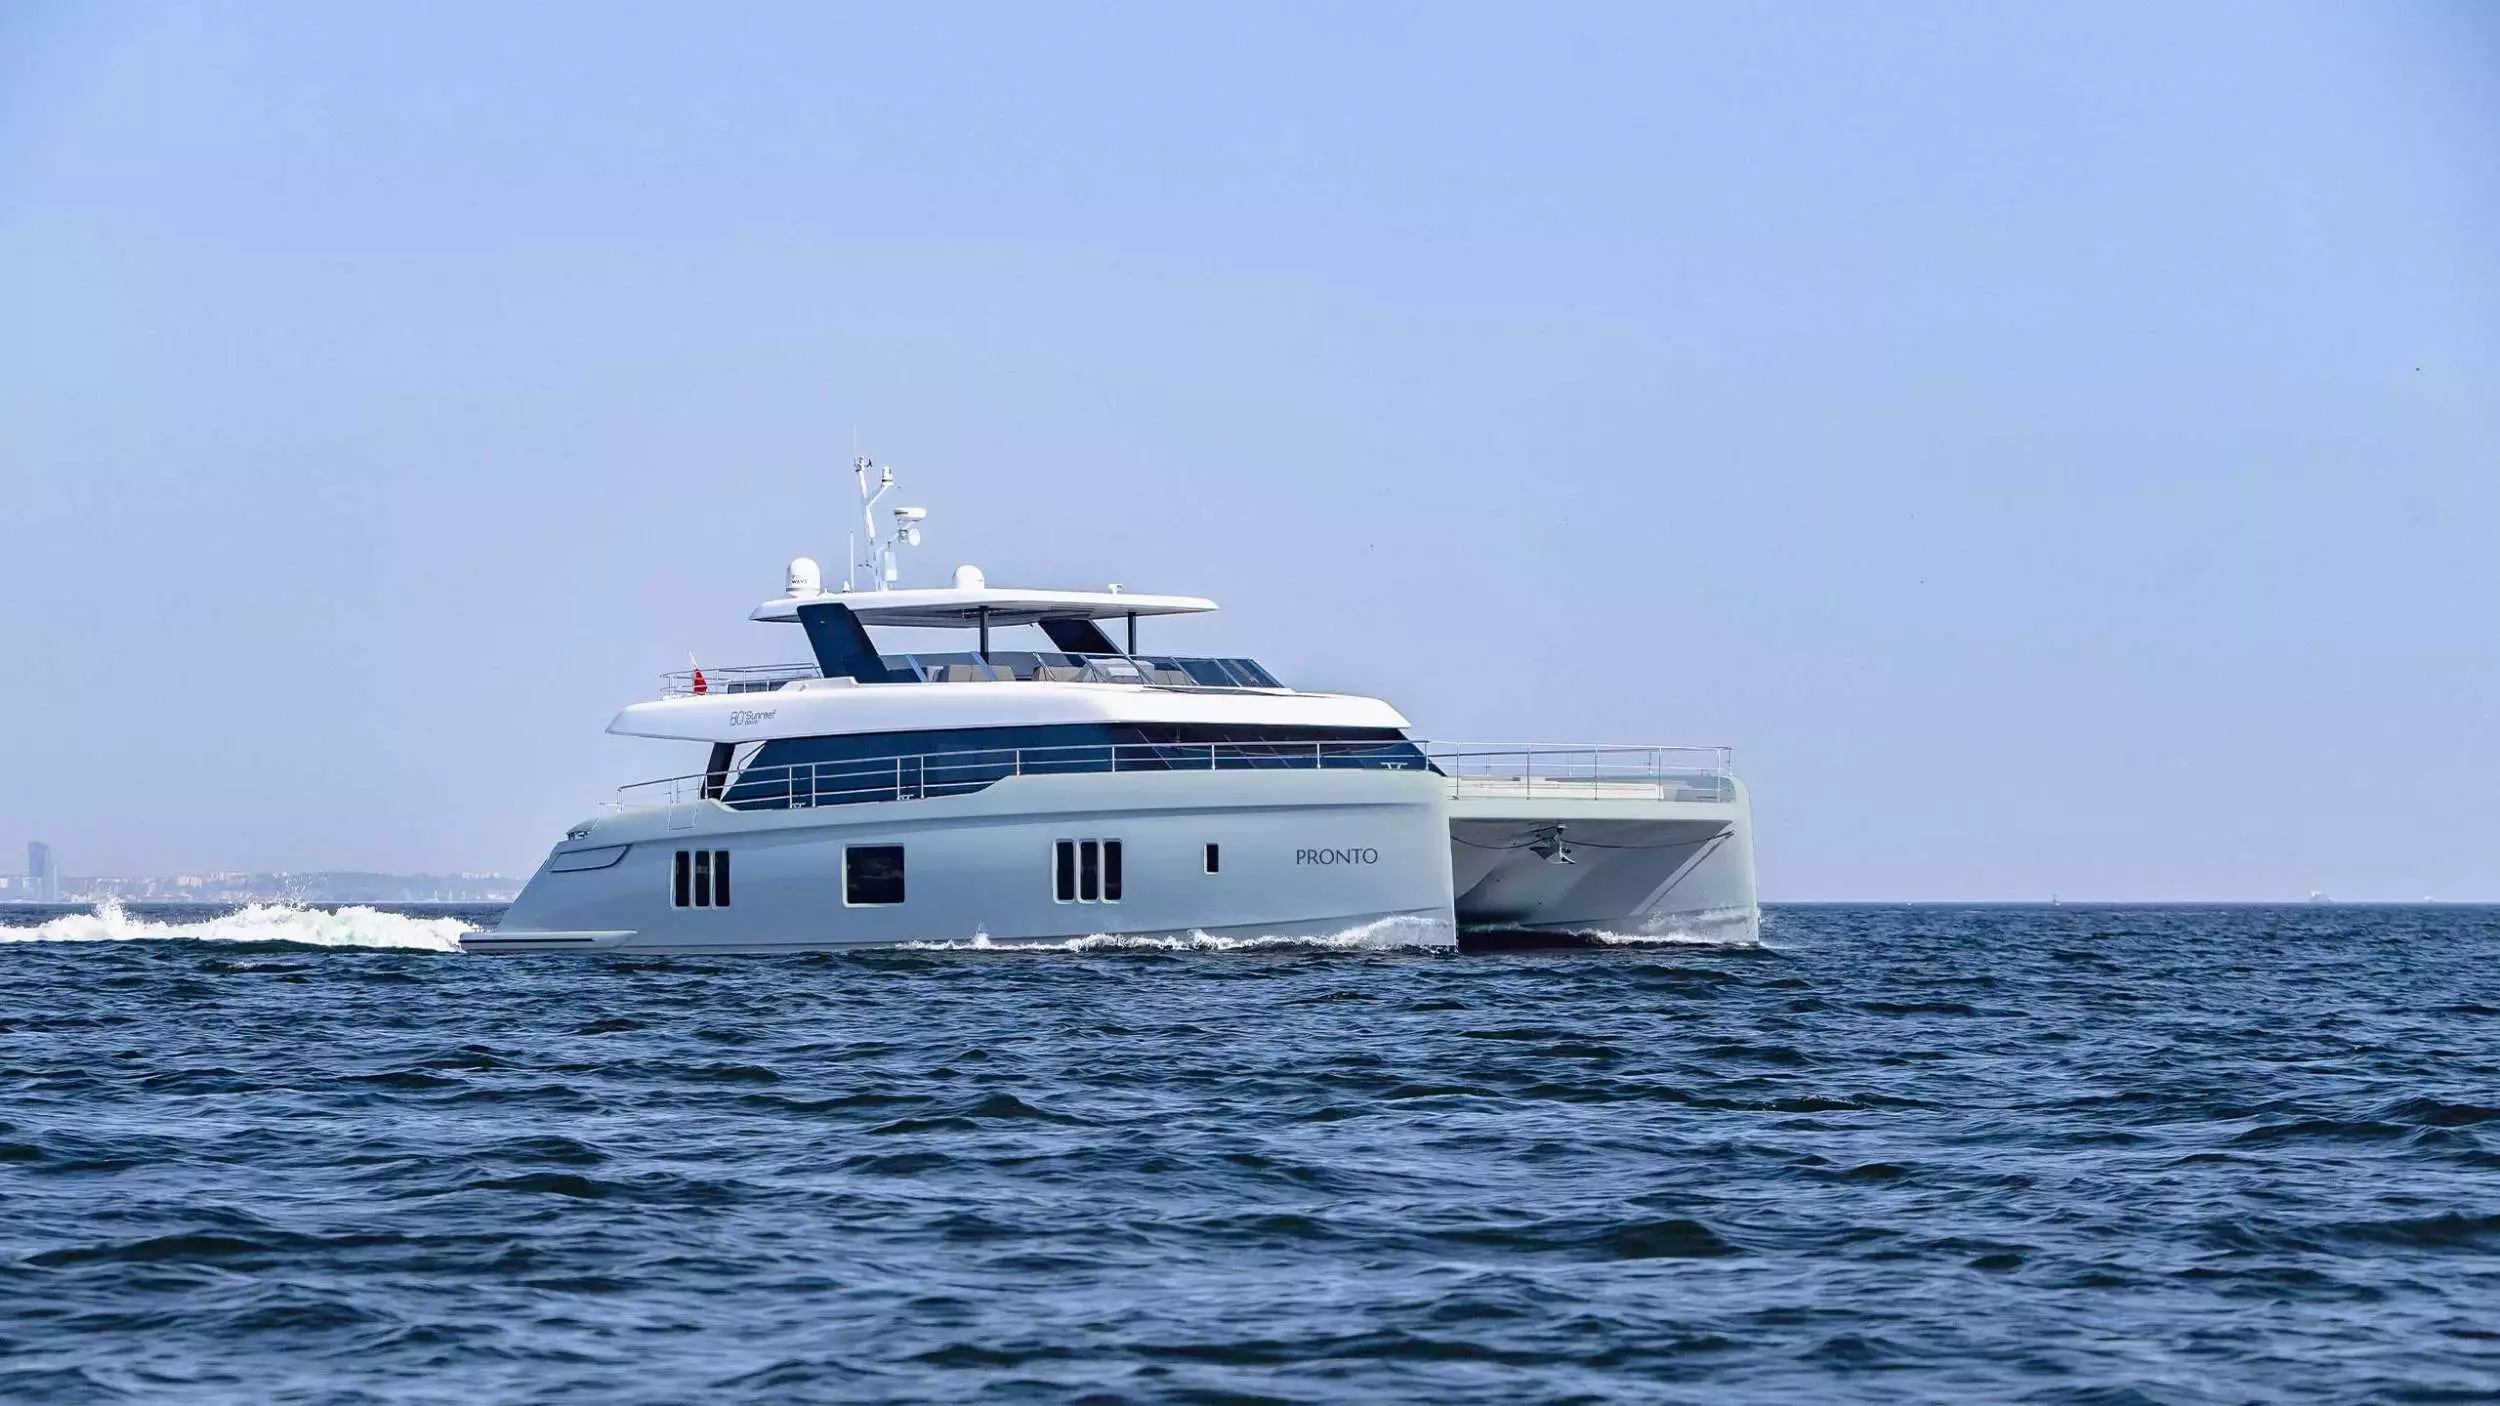 Pronto by Sunreef Yachts - Special Offer for a private Power Catamaran Charter in Abacos with a crew